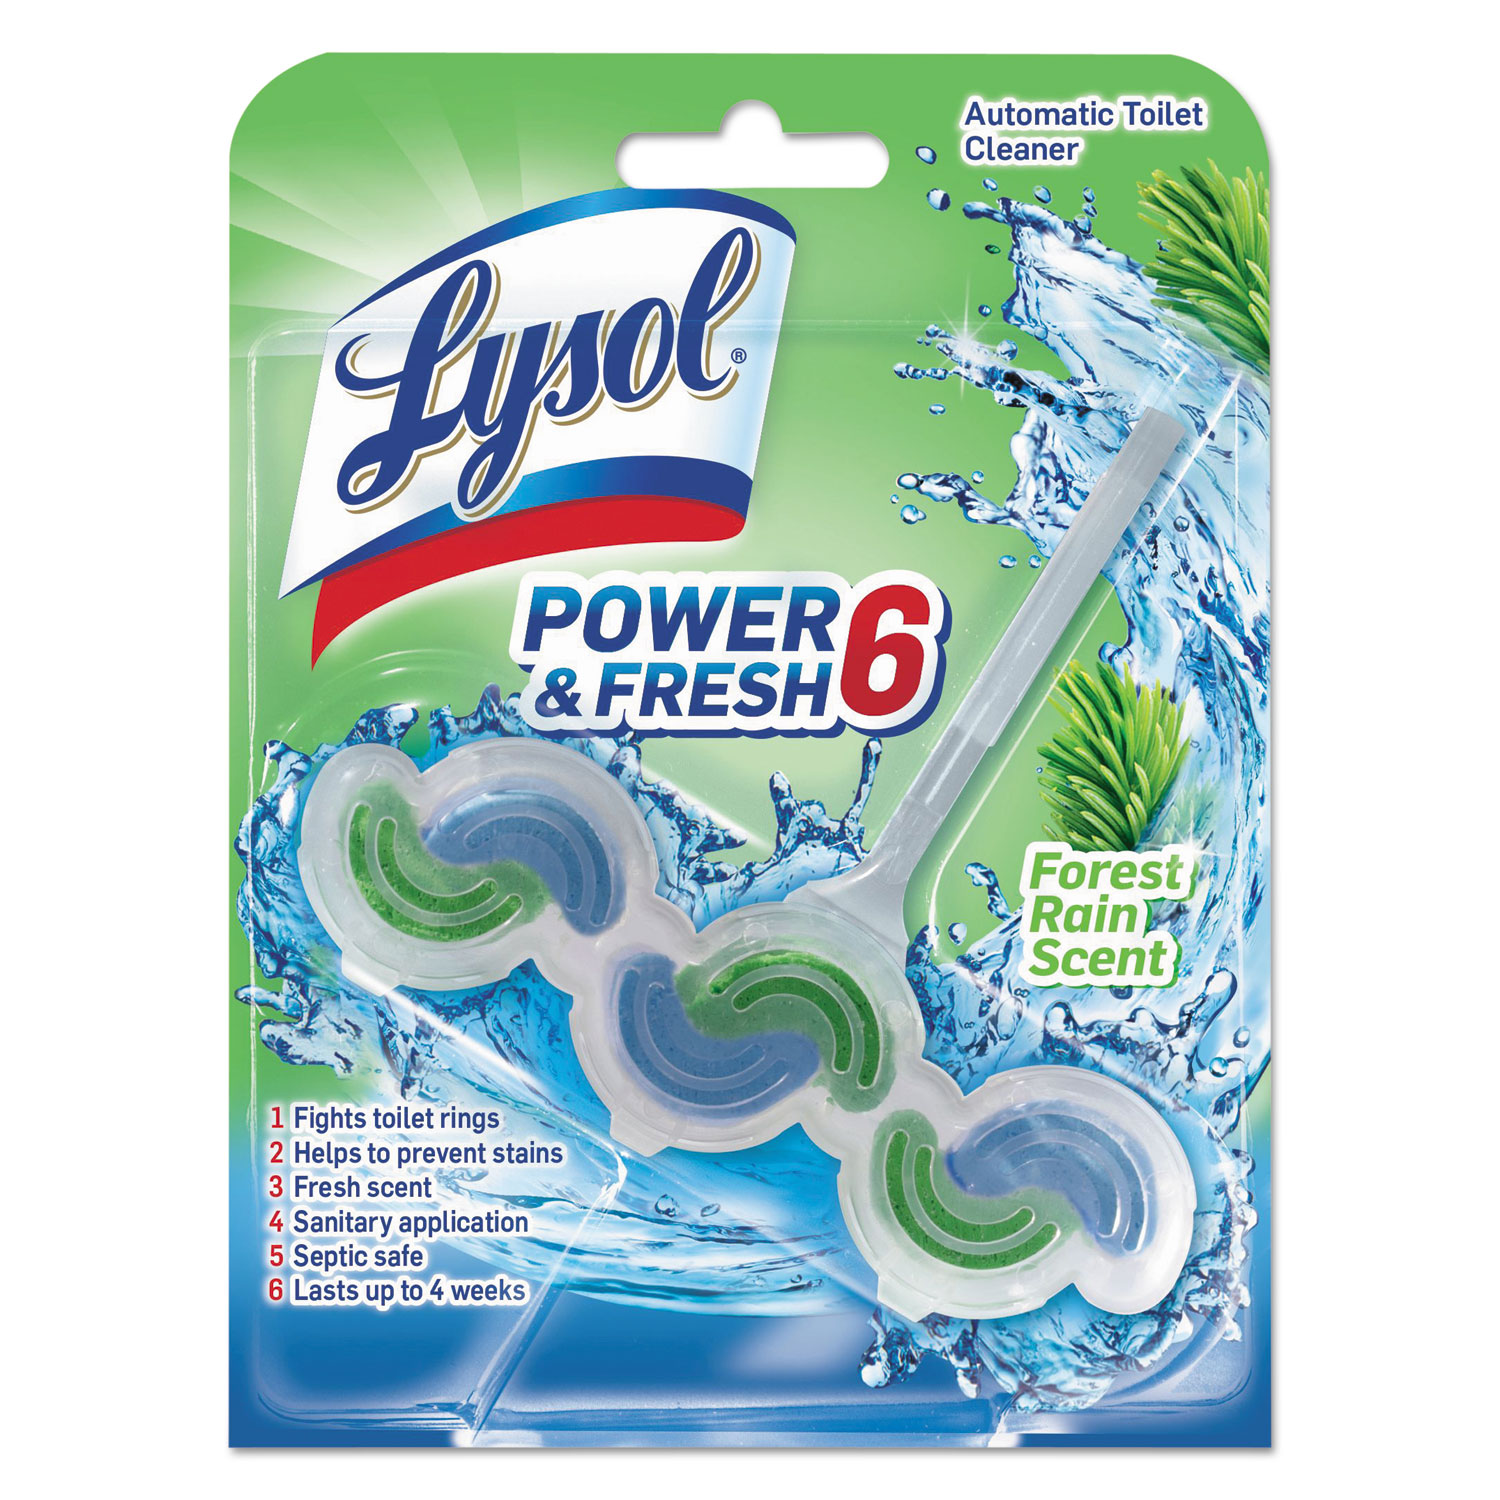 Power & Fresh 6 Automatic Toilet Bowl Cleaner, Forest Rain, 1.37 oz Clip-on